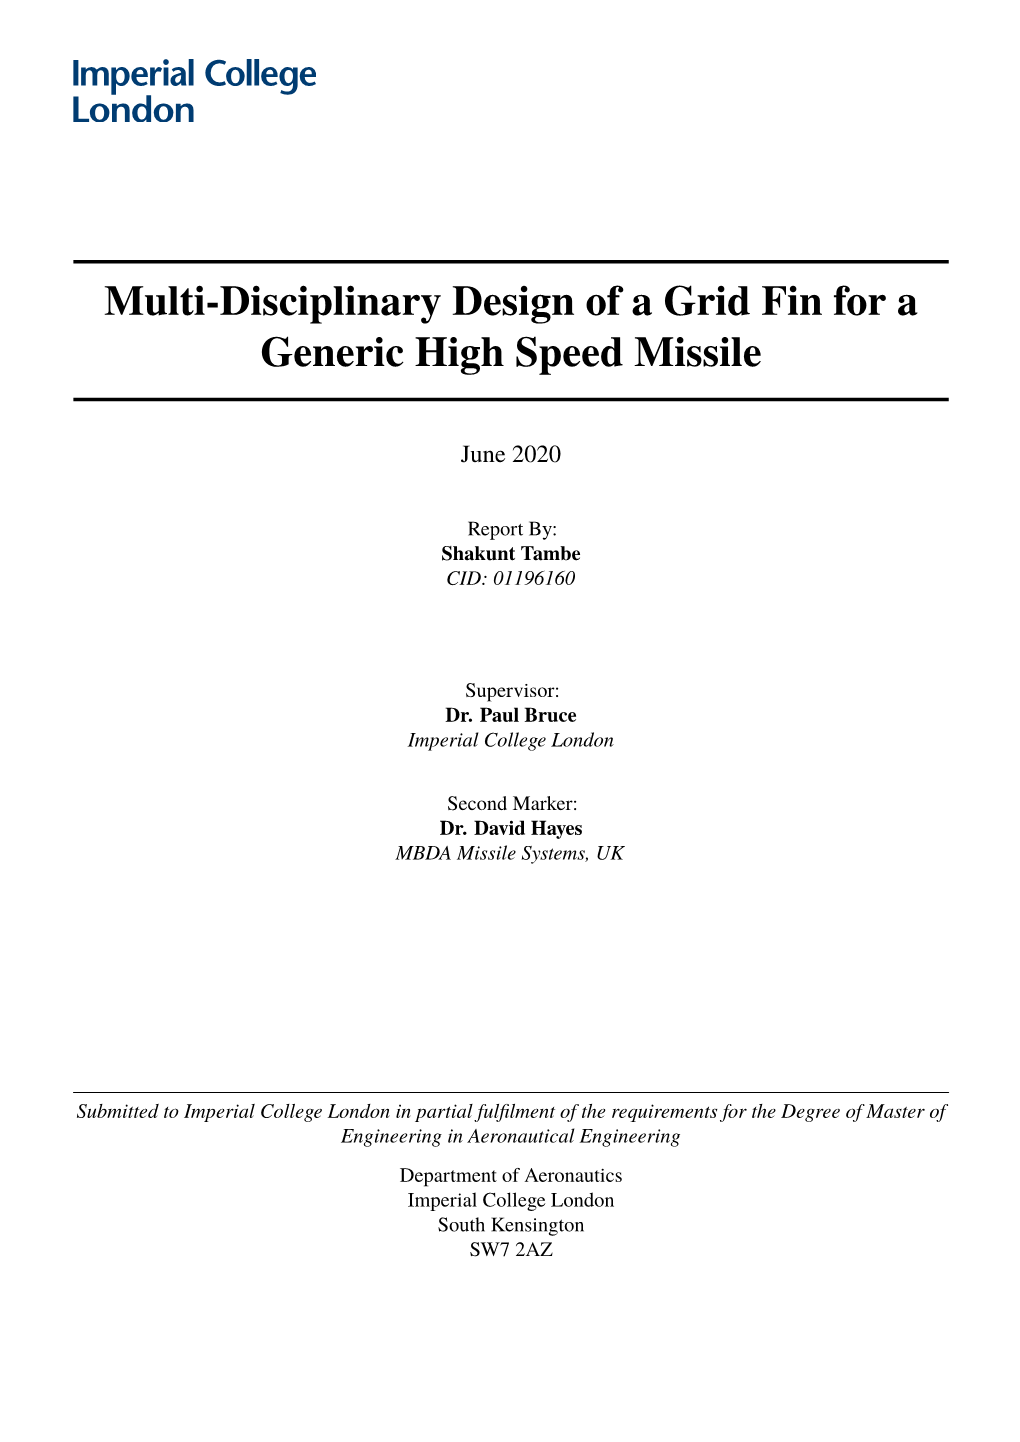 Multi-Disciplinary Design of a Grid Fin for a Generic High Speed Missile